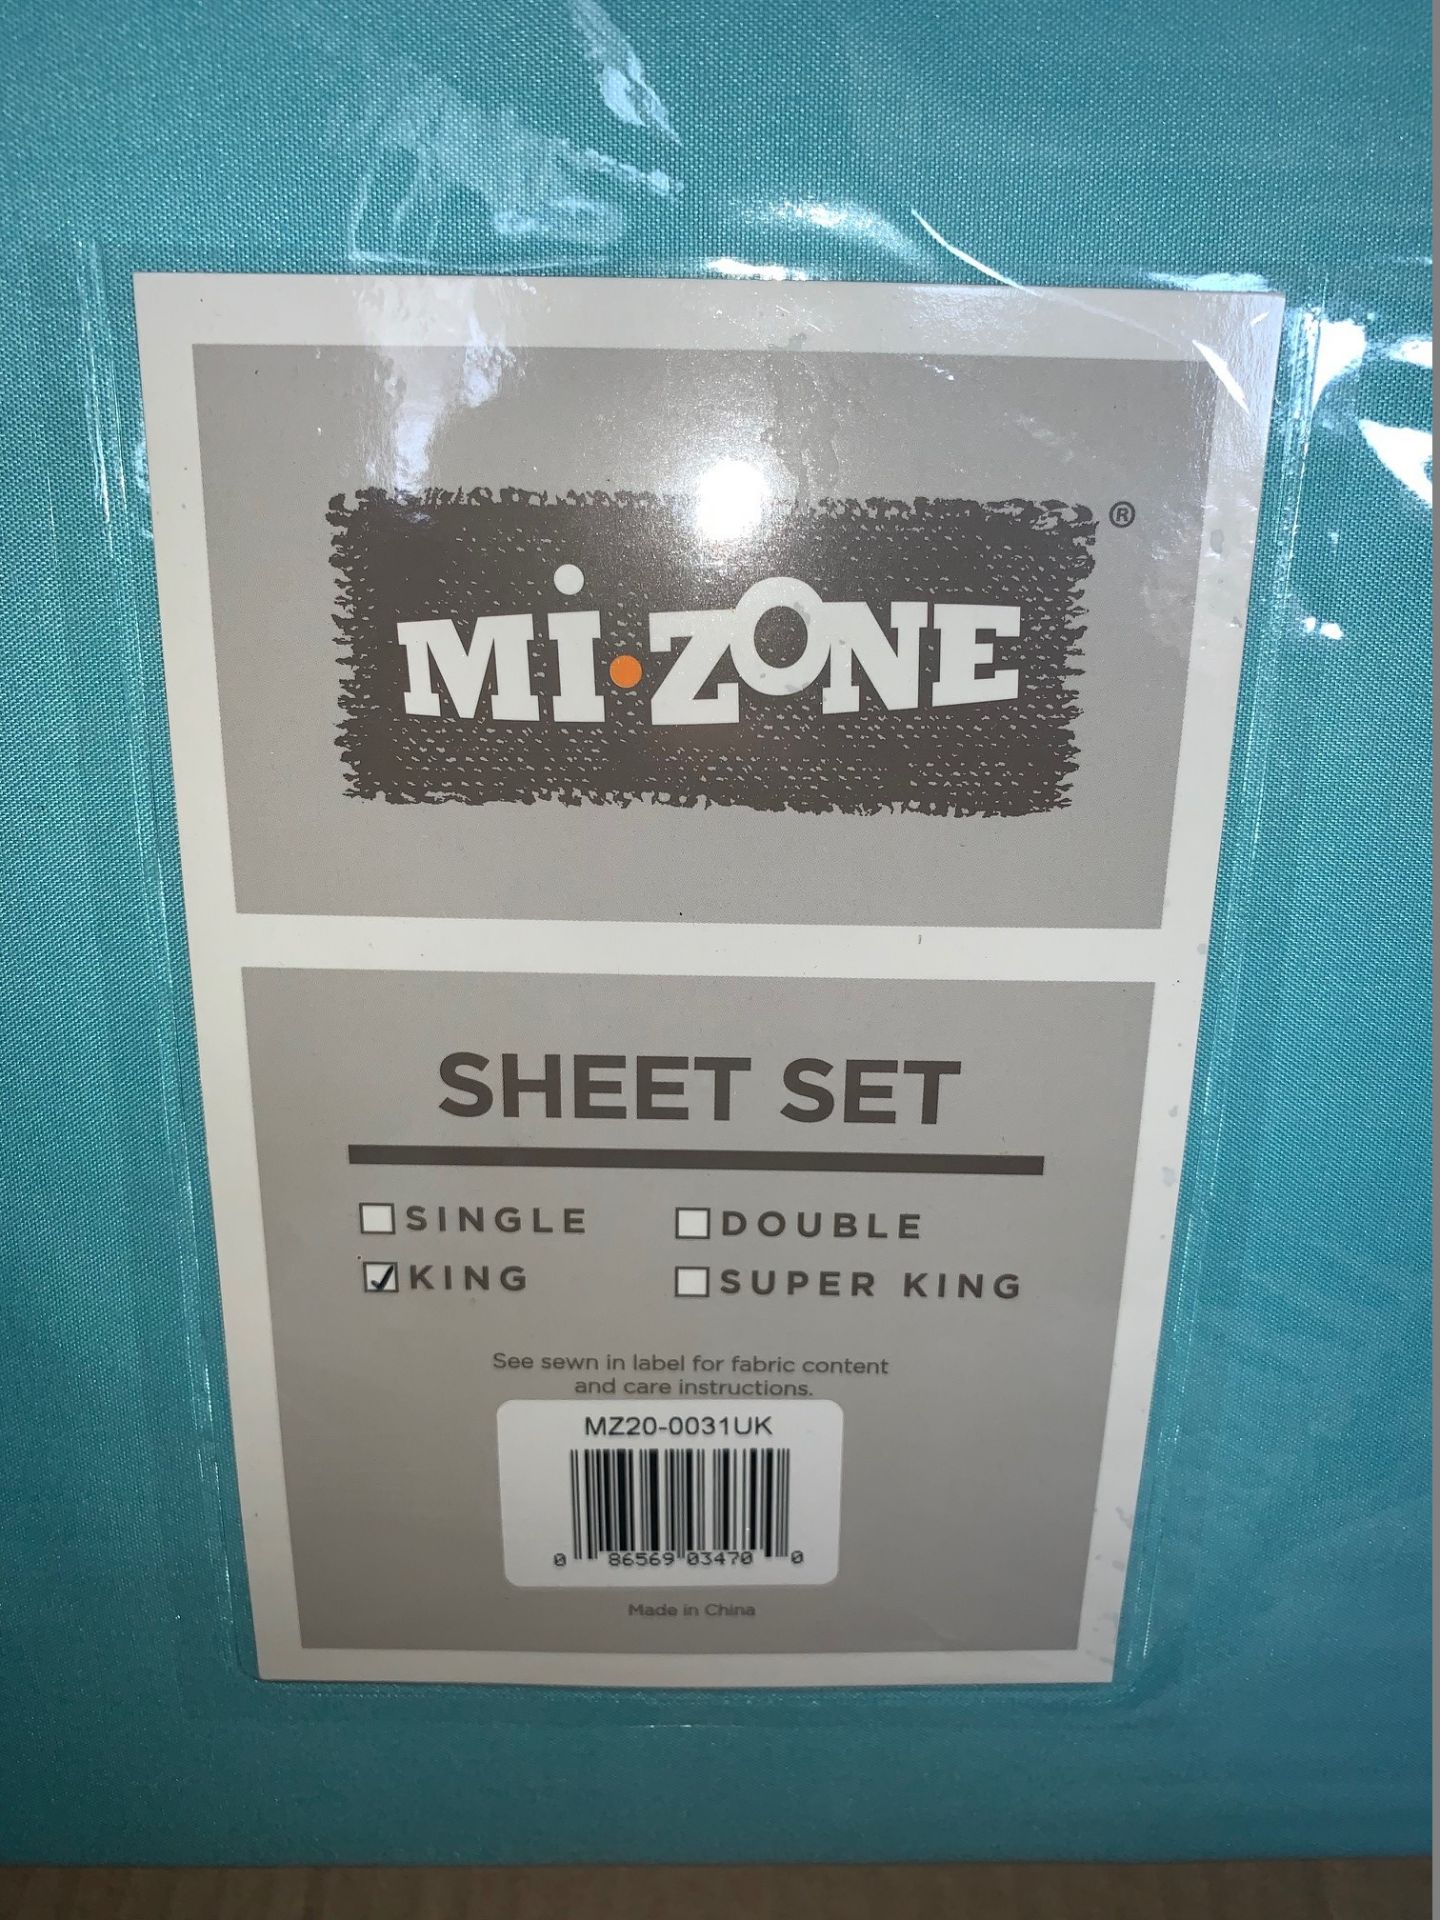 1 x Mi-Zone King Size Sheet Set Teal - Includes Fitted Sheet, Flat Sheet and Pillowcases - Product - Image 2 of 2